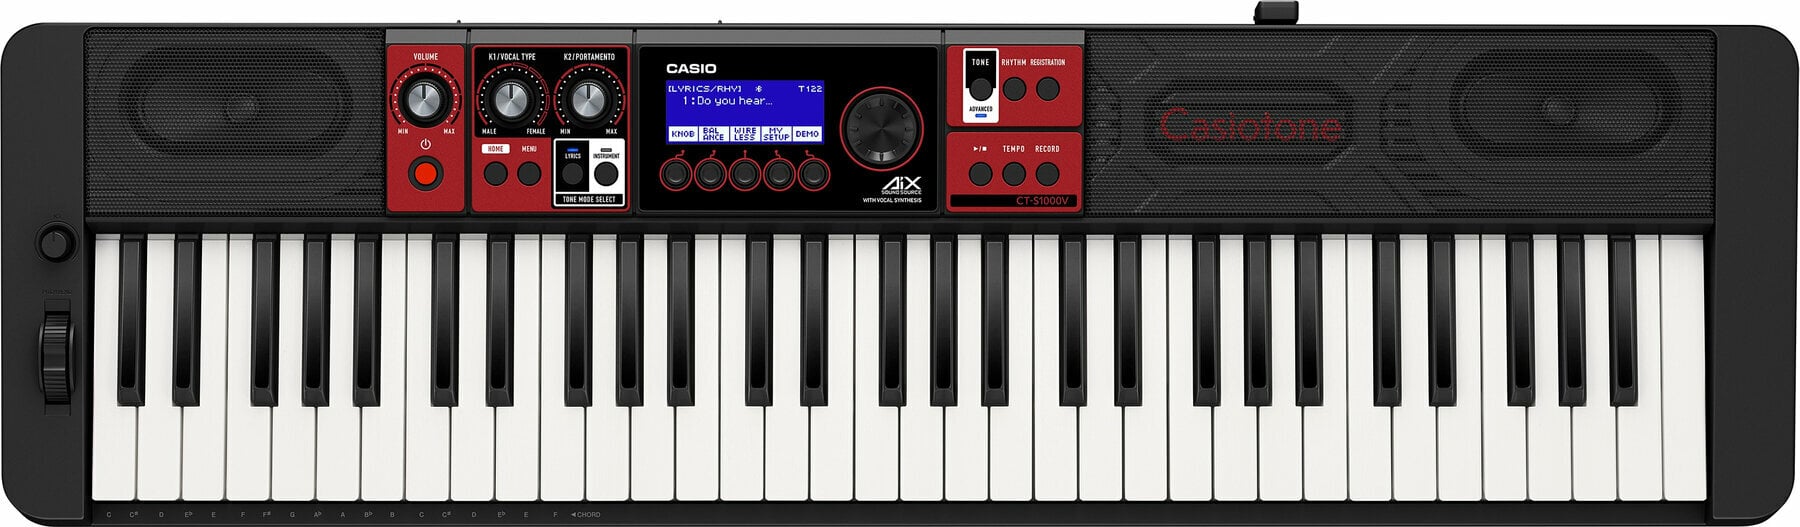 Keyboard with Touch Response Casio CT-S1000V